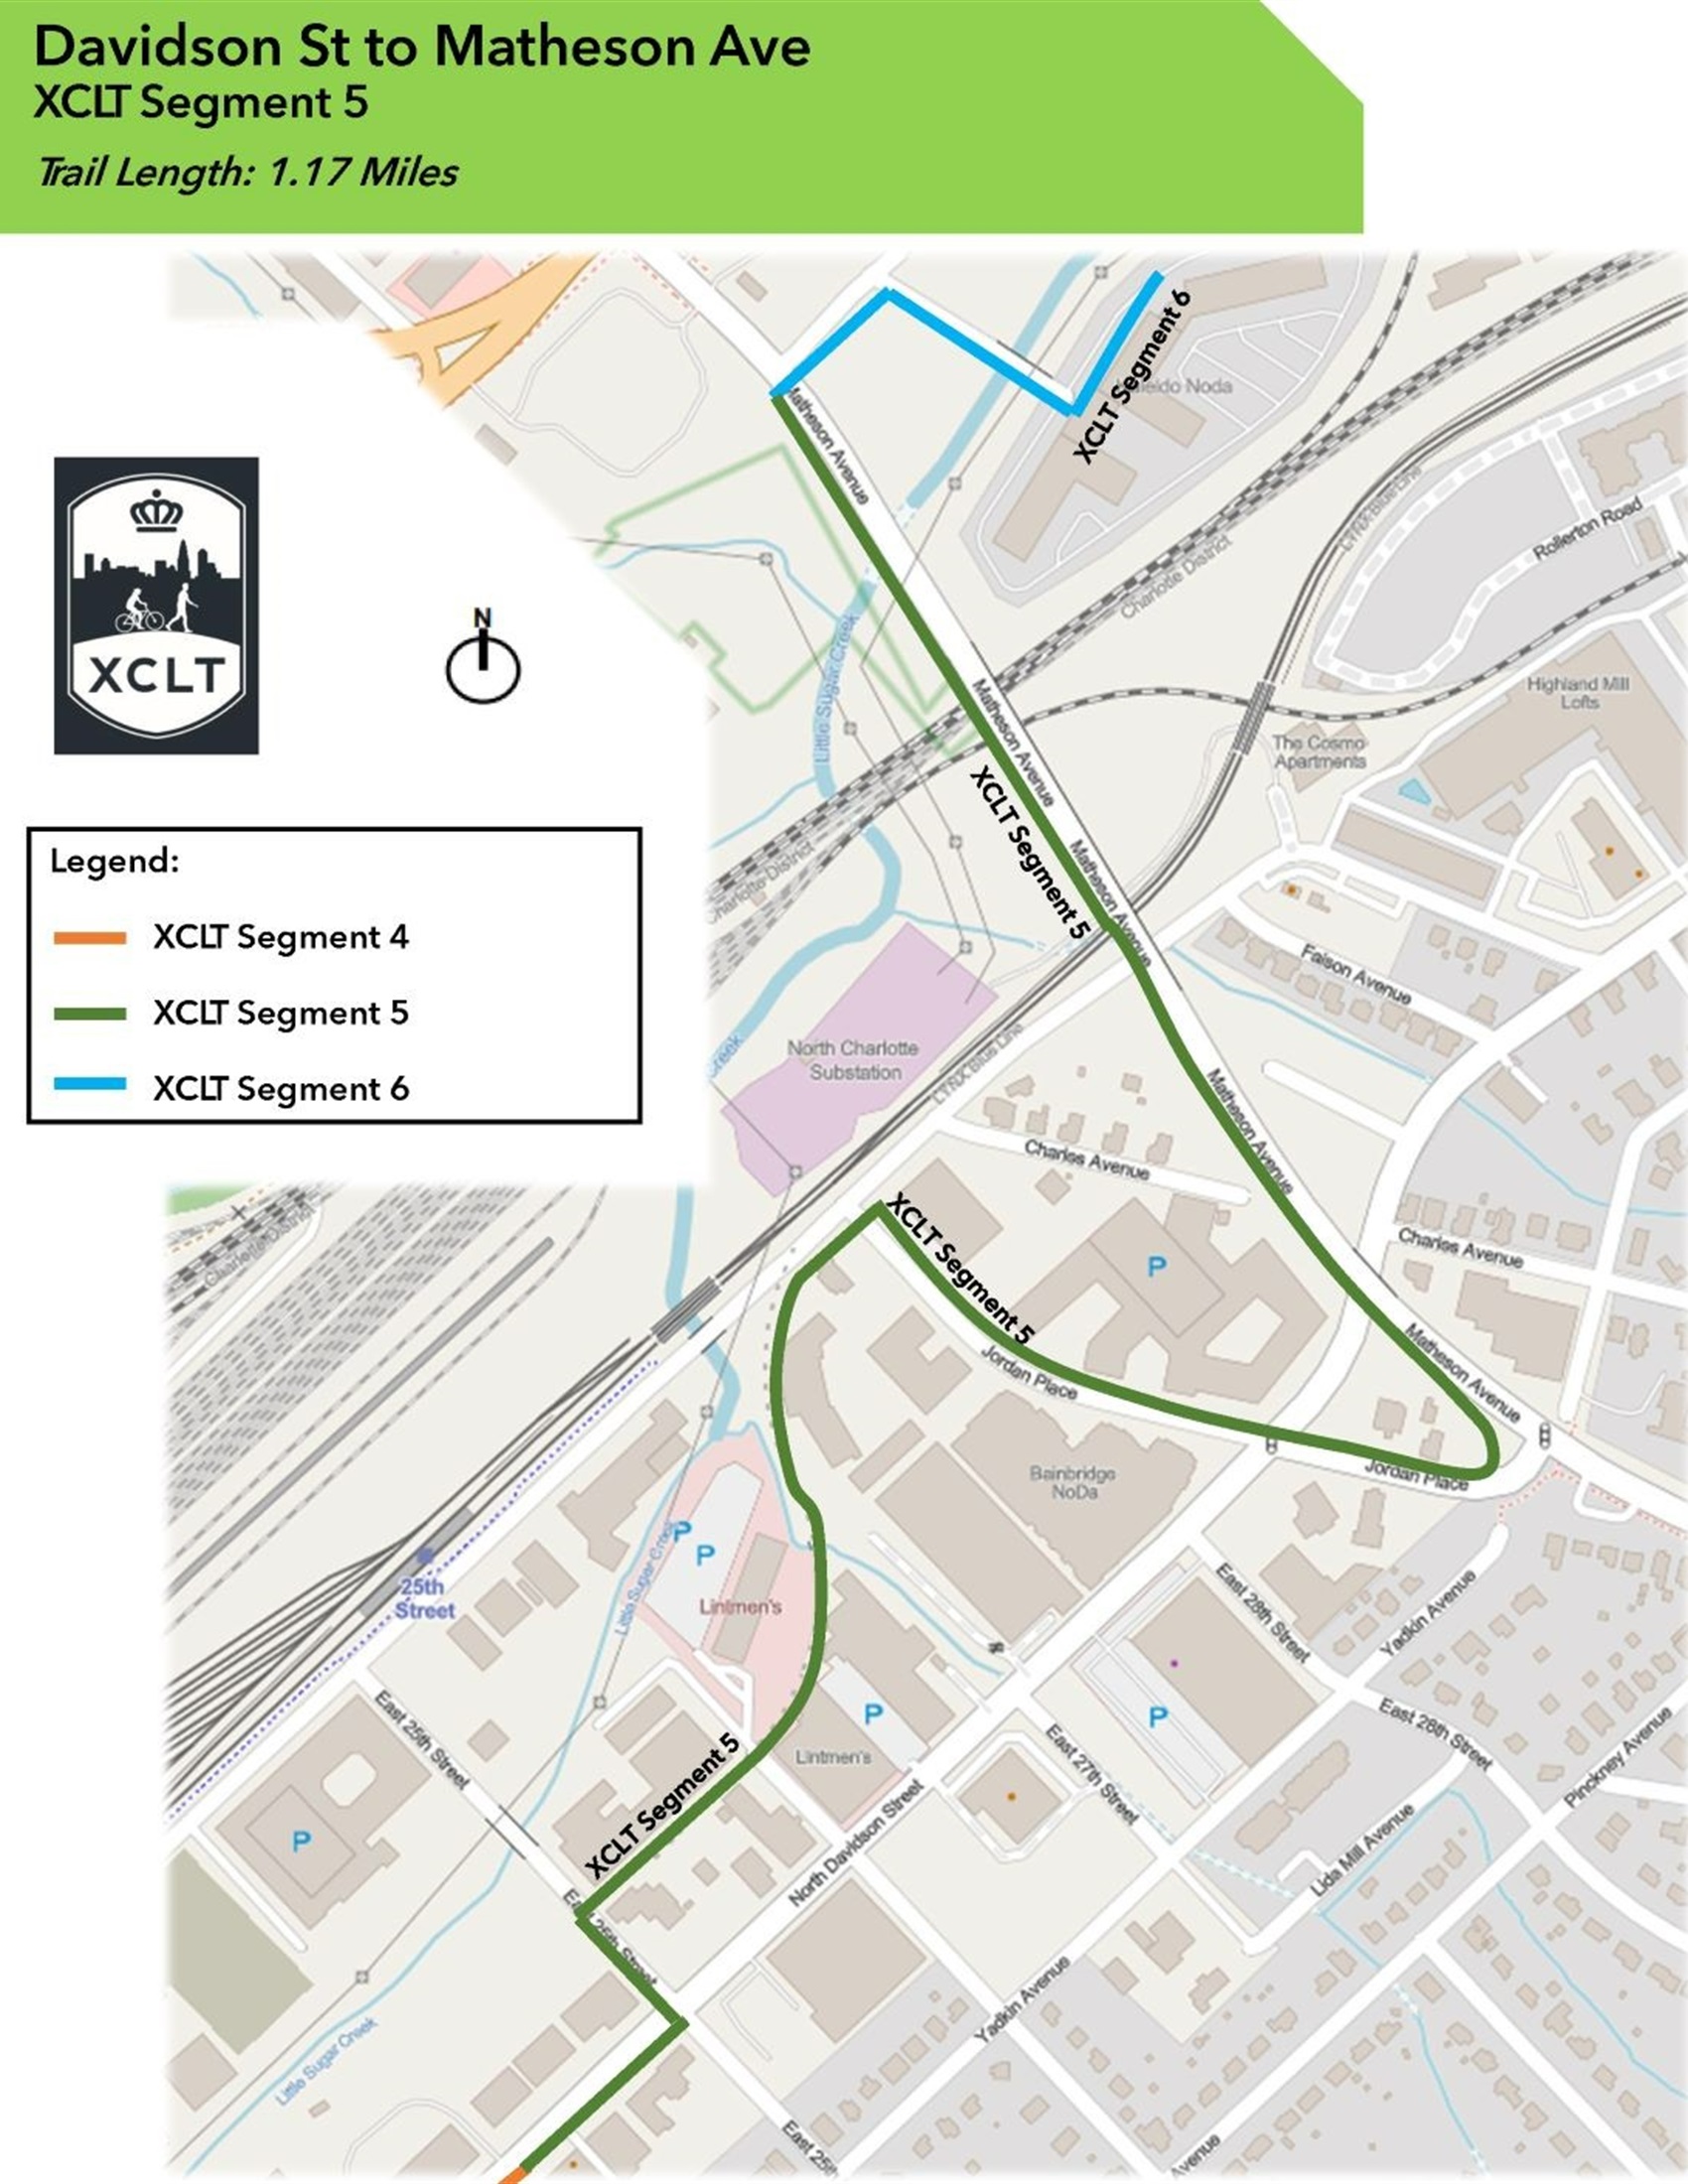 An aerial map of the segment with a green line indicating the alignment of the trail